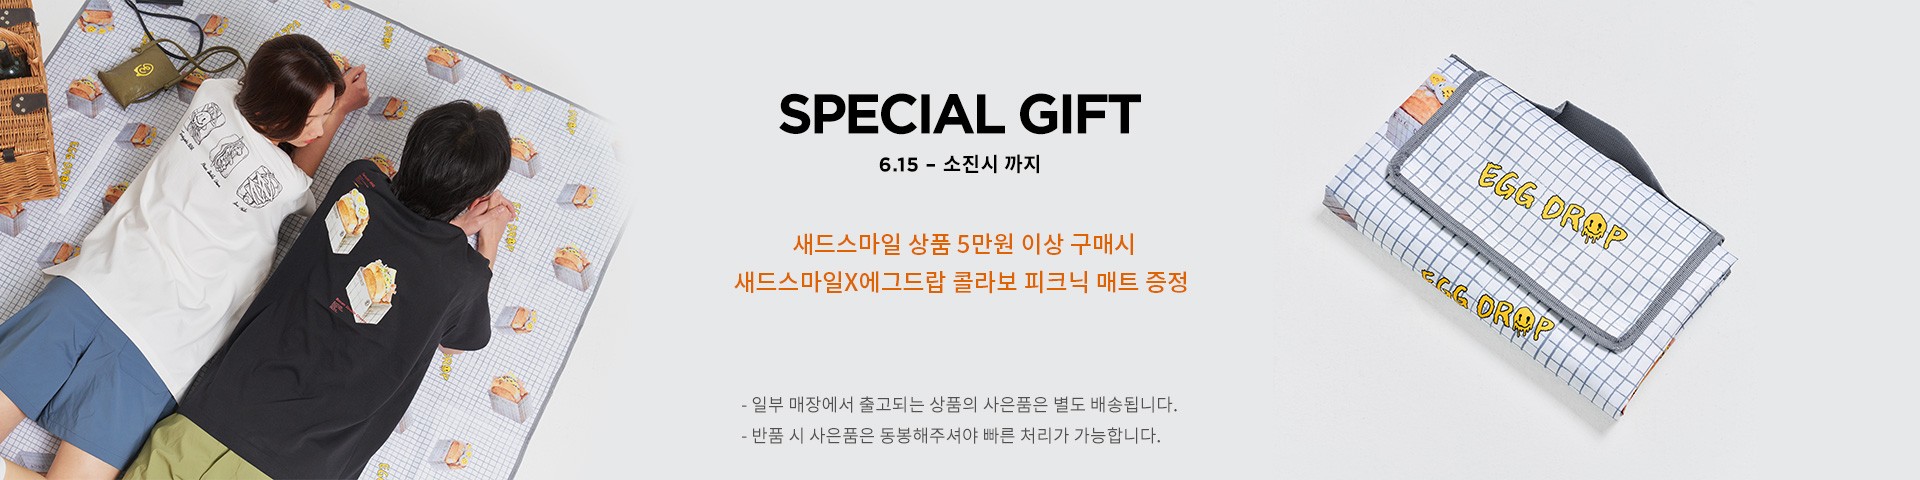 GIFT EVENT